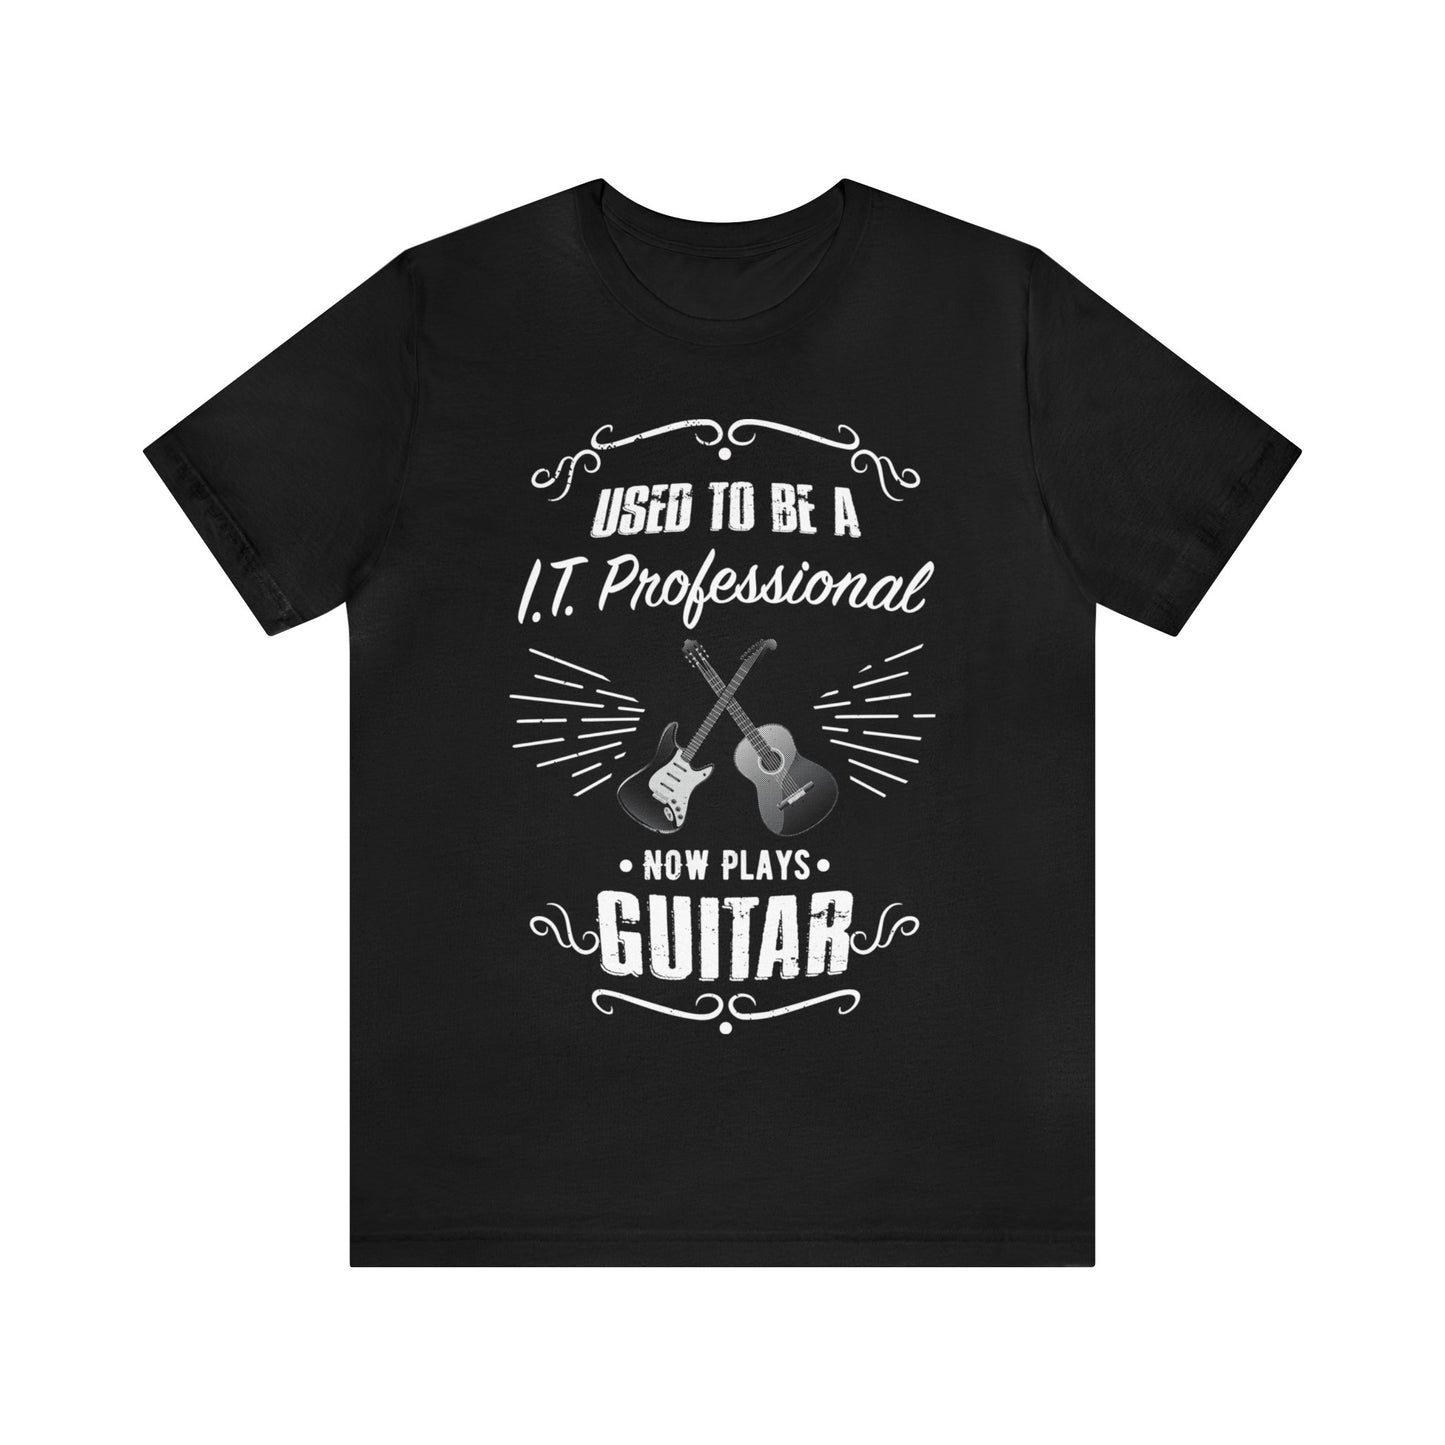 Used to be a I.T. PROFESSIONAL; Now Plays GUITAR - Funny Retirement Gift, Unisex T-shirt Bella+Canvas 3001, dark colors for amateur musician/guitar player